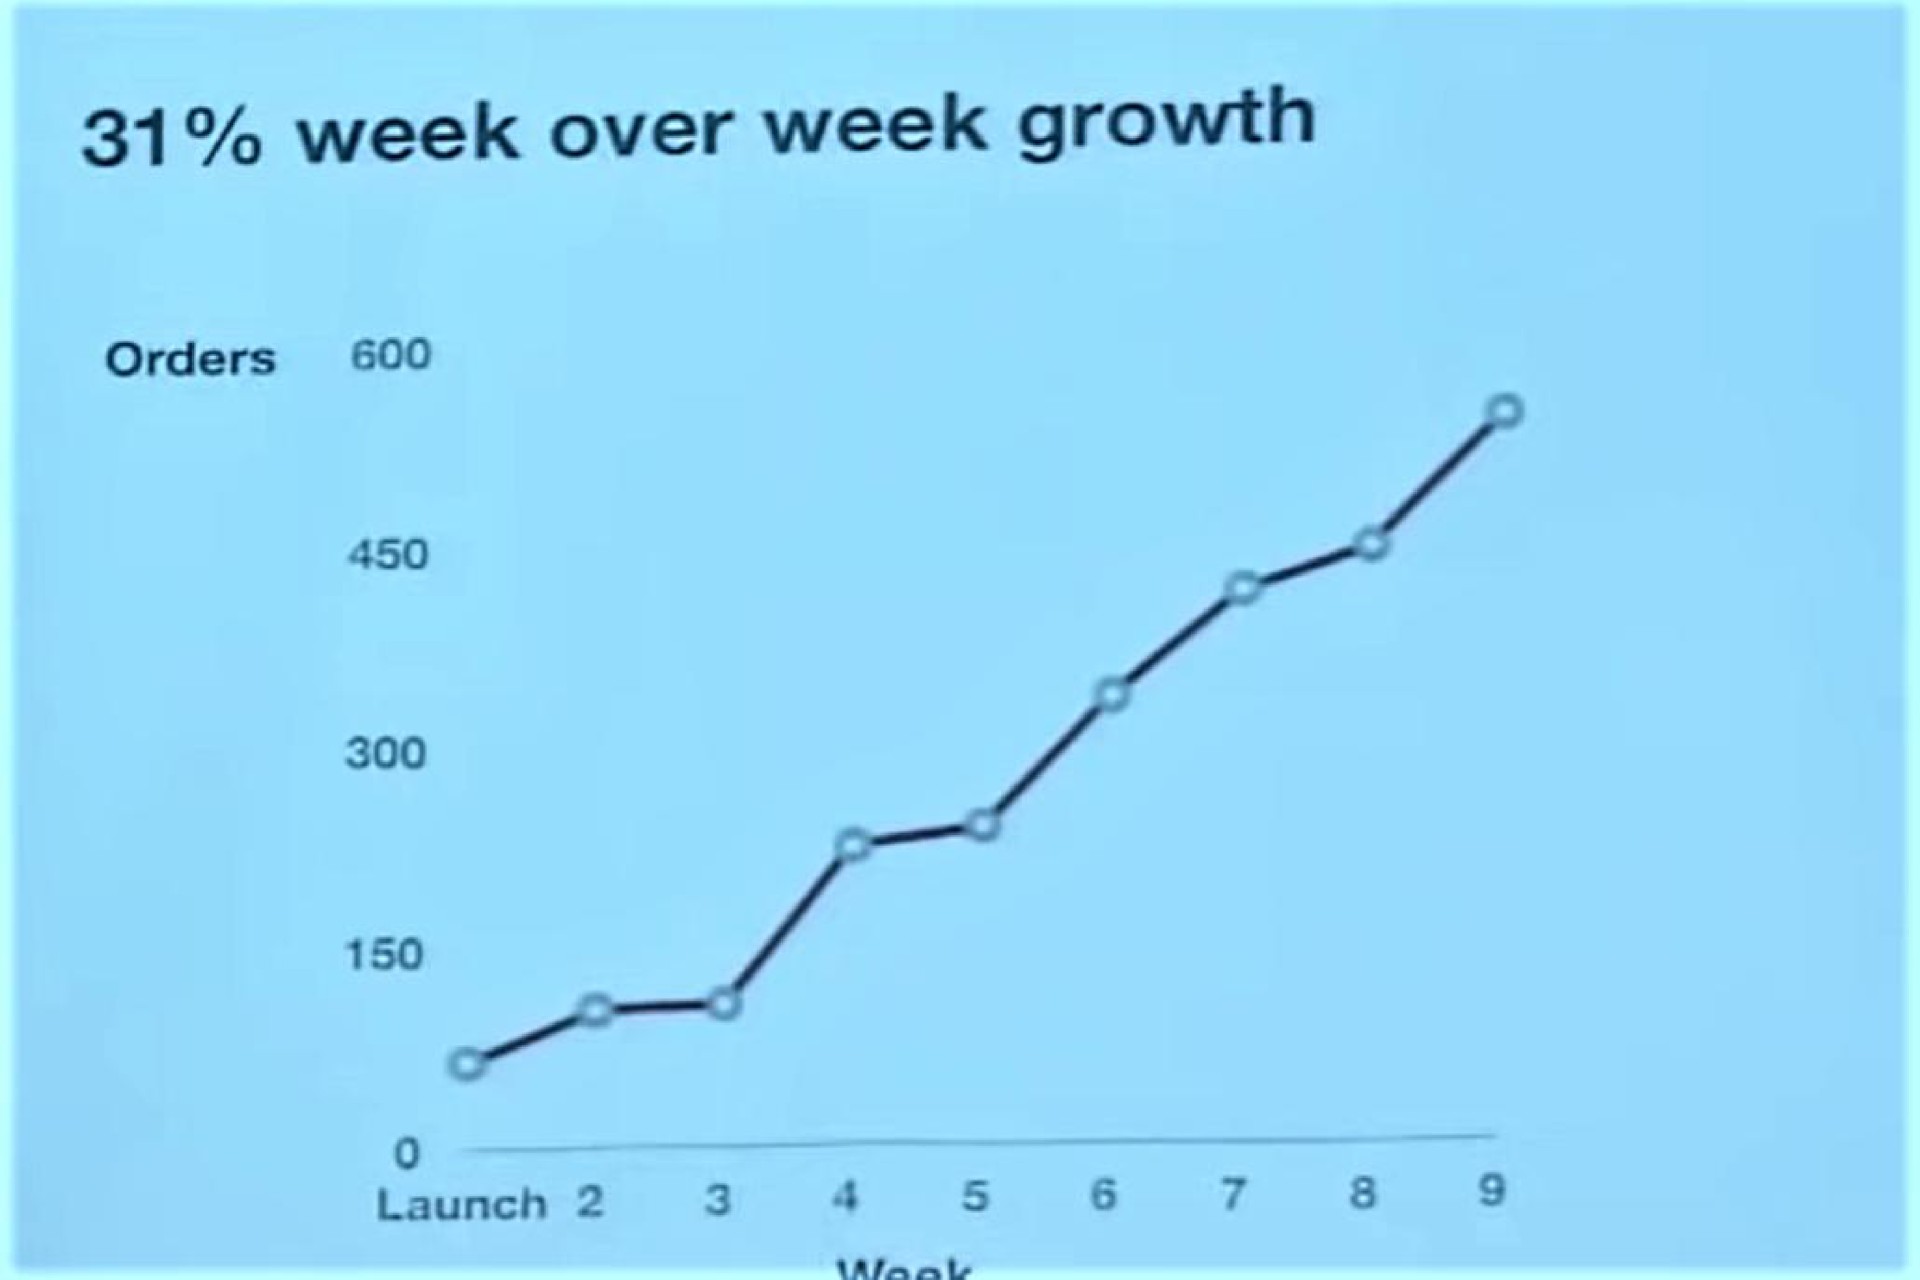 week over week growth orders a of a at launch | DoorDash